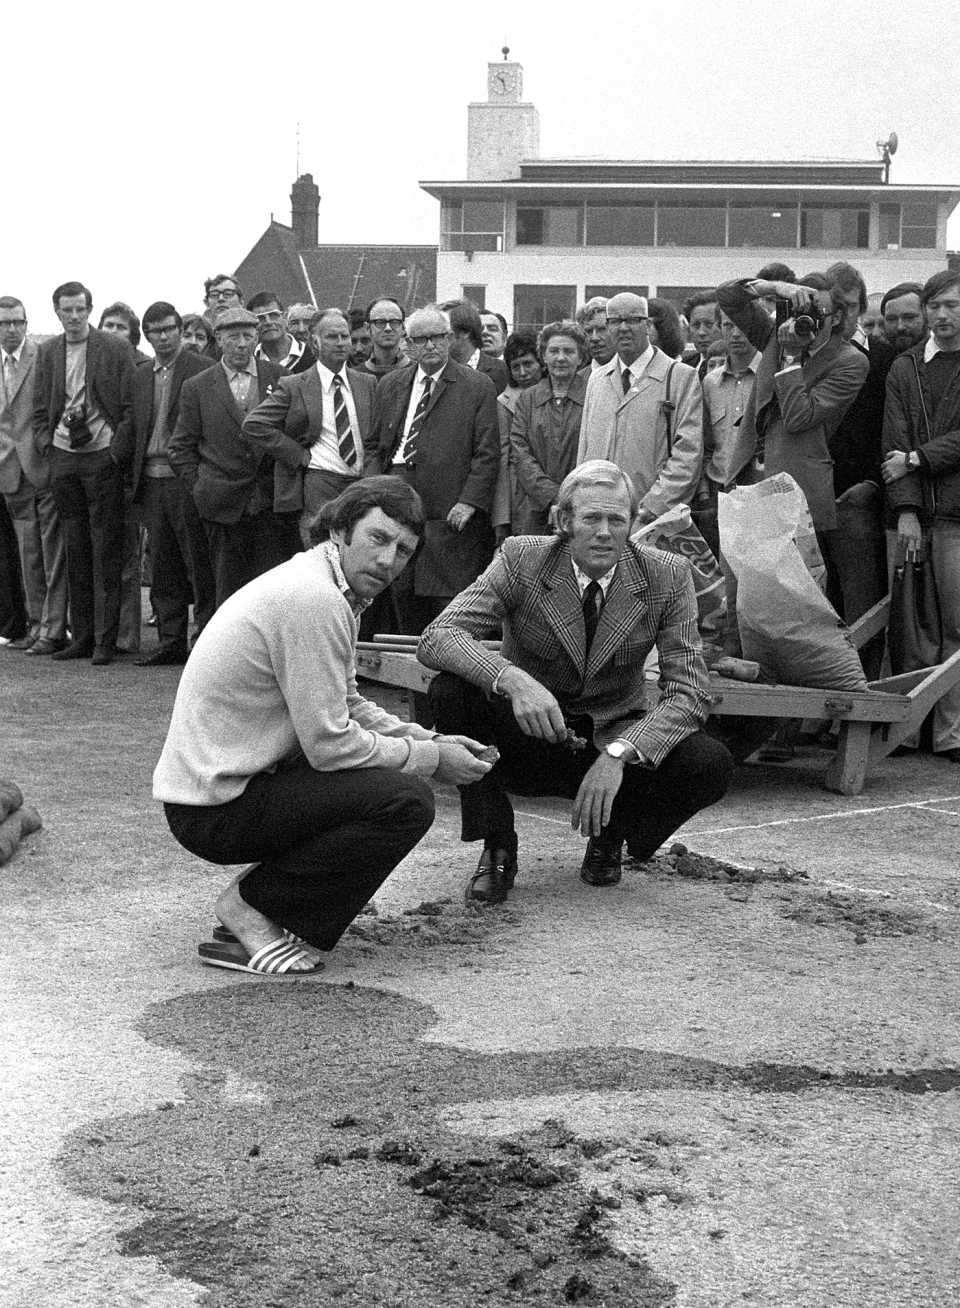 Tony Greig and Ian Chappell inspect the vandalised pitch, England v Australia, 3rd Test, Leeds, August 19, 1975